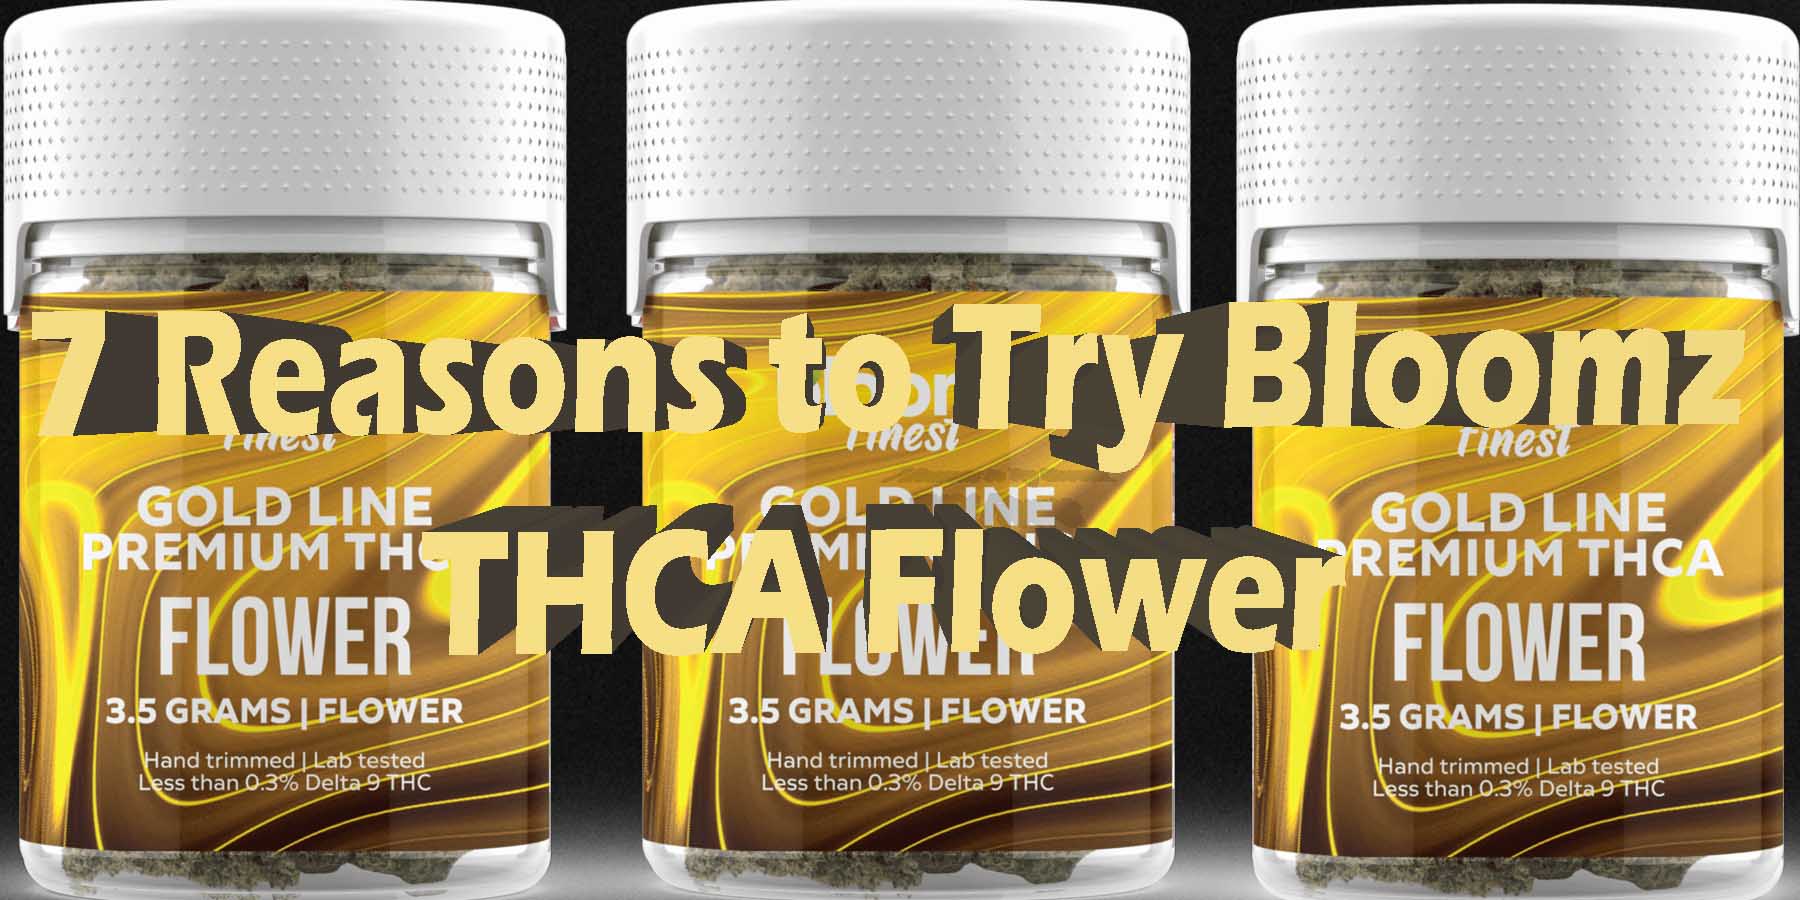 7 Reasons to Try Bloomz THCA Flower WhereToGet HowToGetNearMe BestPlace LowestPrice Coupon Discount For Smoking Best High Smoke Shop Online Near Me StrongestBrand BestBrand Binoid